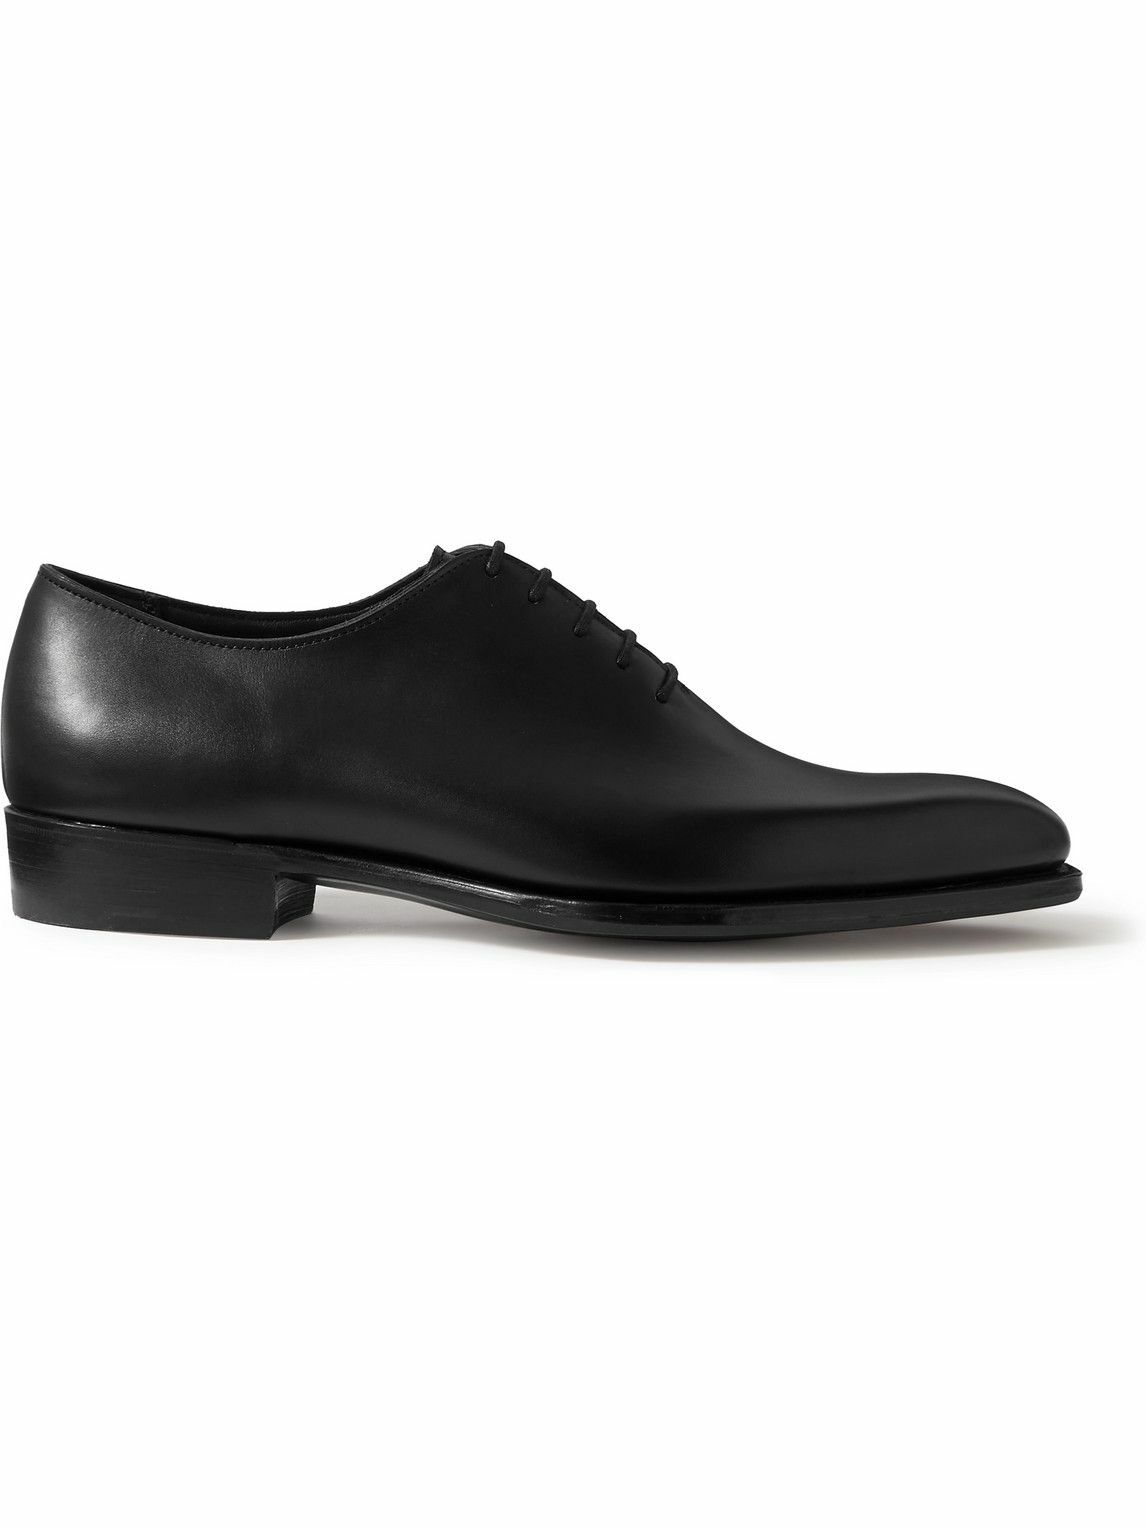 George Cleverley - Merlin Leather Oxford Shoes - Black George Cleverley